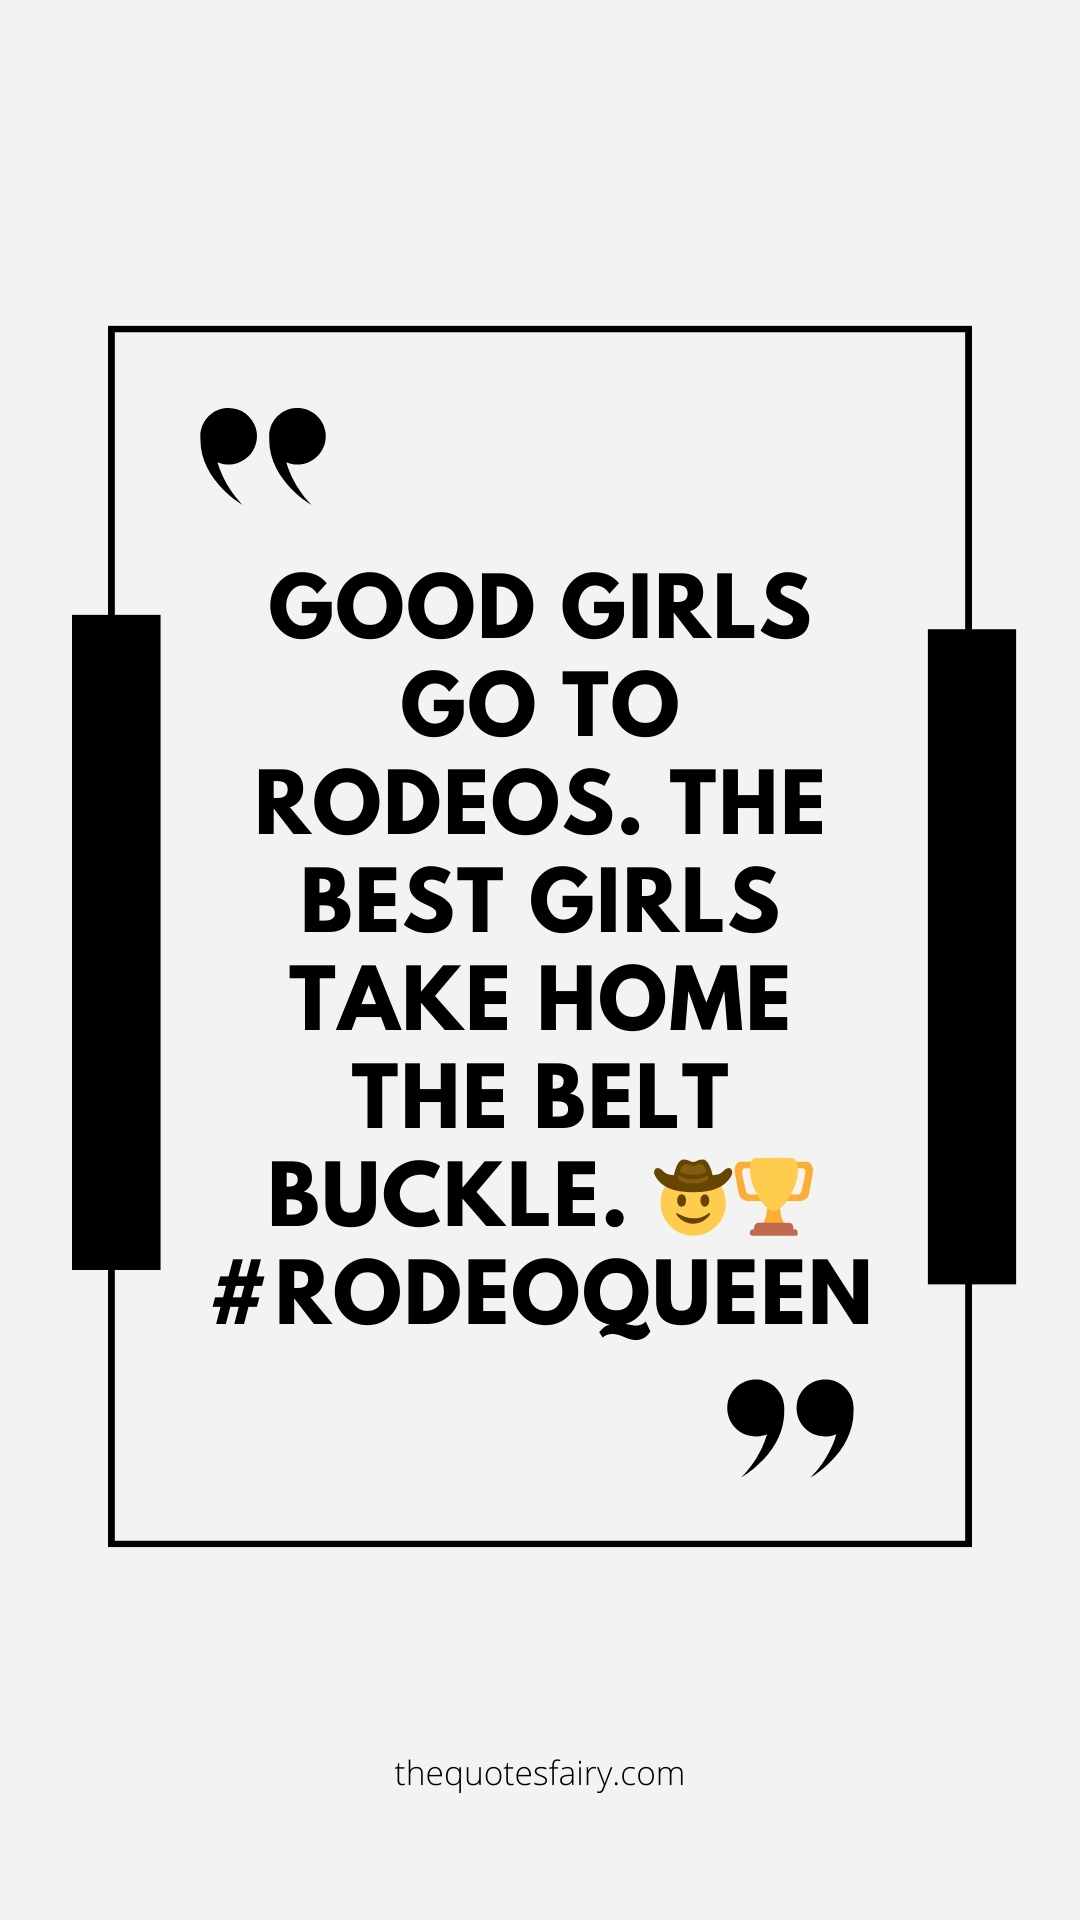 20 Fun Rodeo Cowgirl Captions for Instagram